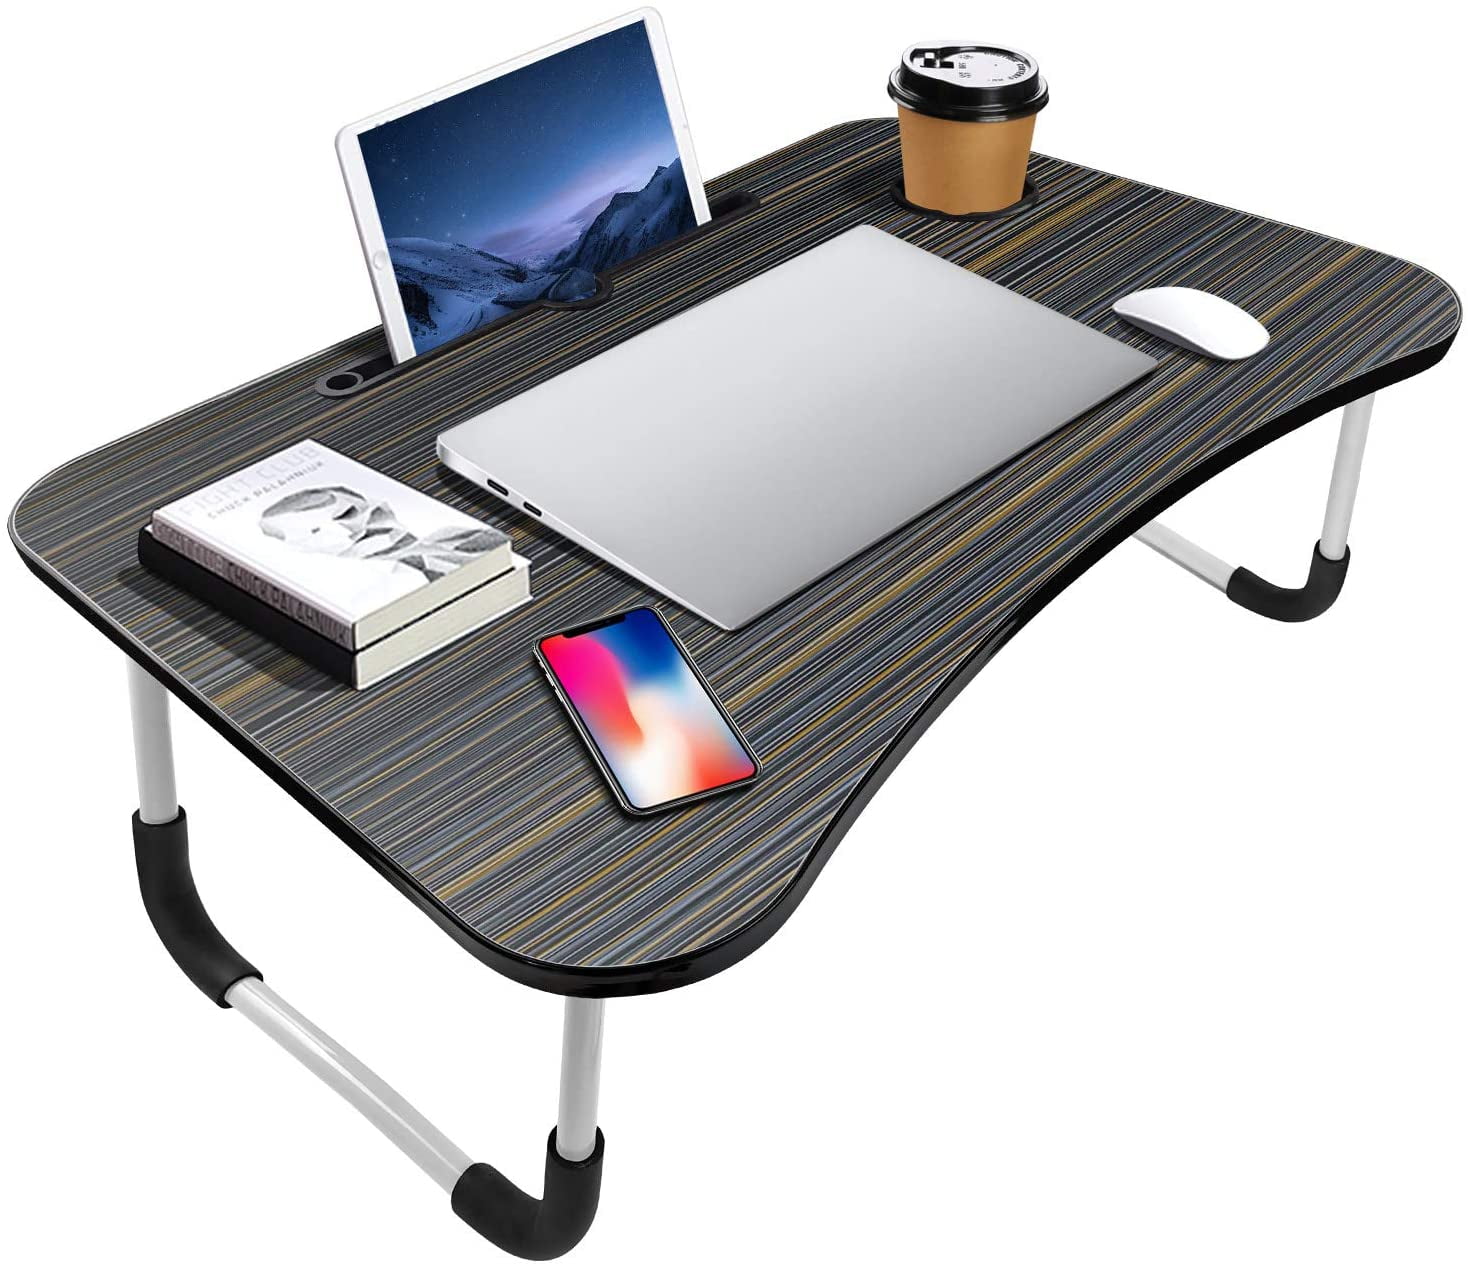 Portable Adjustable Folding Laptop Desk Foldable Study Computer Bed Table Stand 